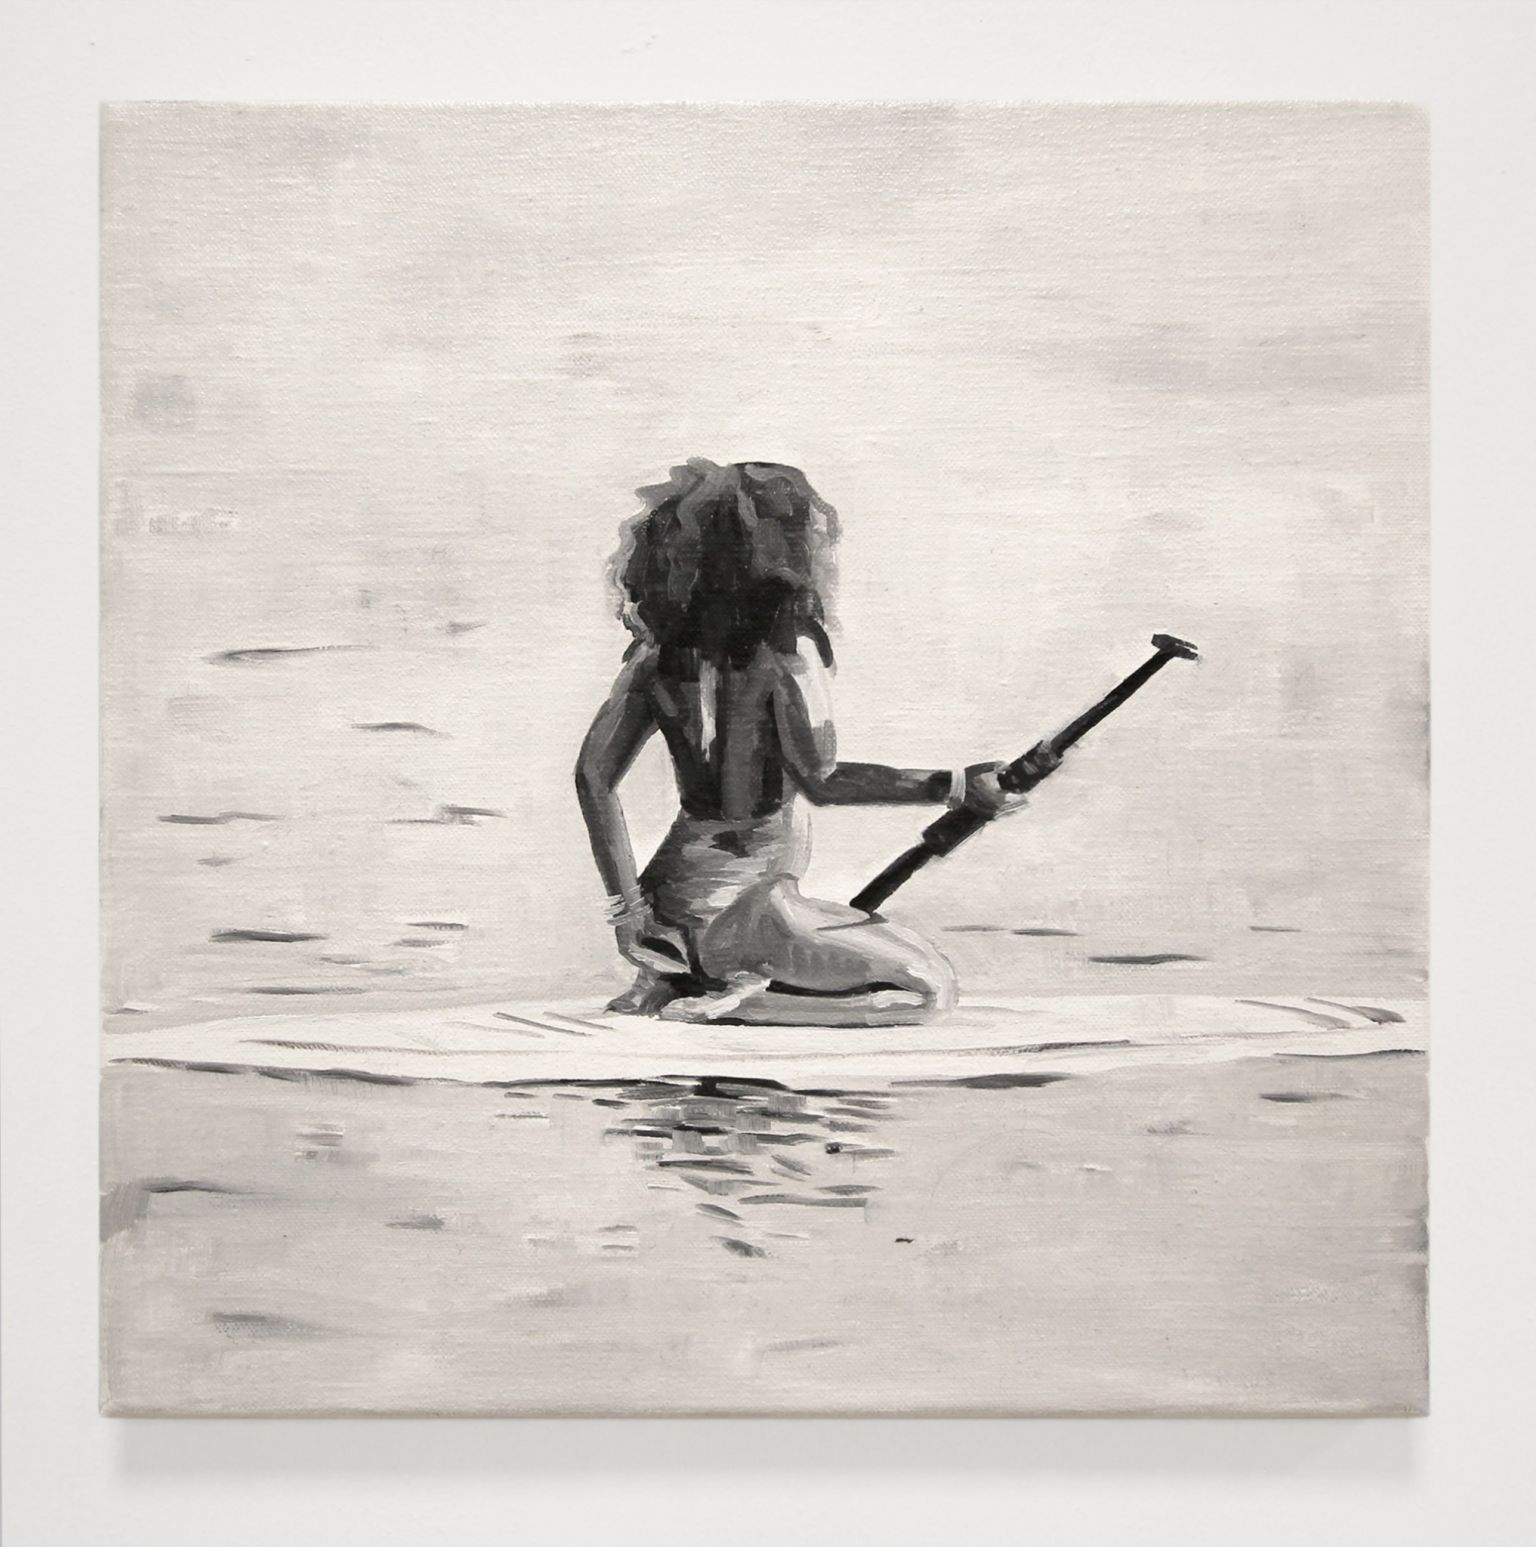 Paddle Painting 7 Oil On Canvas 2018 30 X 30 Cm